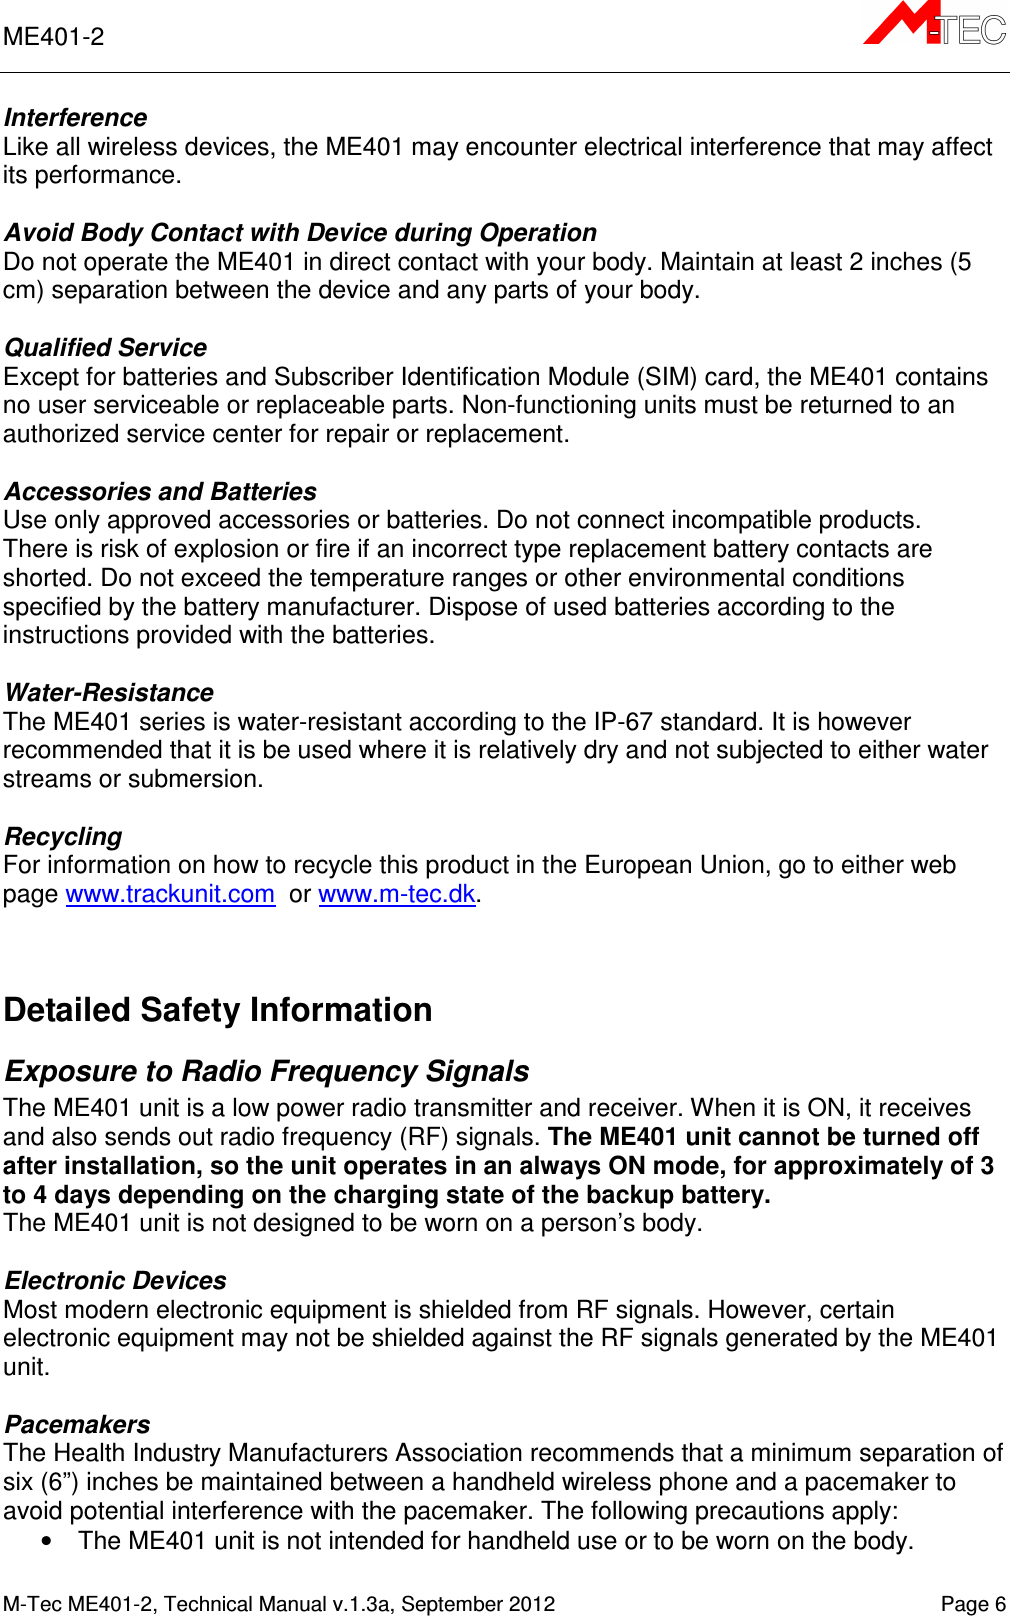 ME401-2       M-Tec ME401-2, Technical Manual v.1.3a, September 2012    Page 6 Interference Like all wireless devices, the ME401 may encounter electrical interference that may affect its performance.  Avoid Body Contact with Device during Operation Do not operate the ME401 in direct contact with your body. Maintain at least 2 inches (5 cm) separation between the device and any parts of your body.  Qualified Service Except for batteries and Subscriber Identification Module (SIM) card, the ME401 contains no user serviceable or replaceable parts. Non-functioning units must be returned to an authorized service center for repair or replacement.  Accessories and Batteries Use only approved accessories or batteries. Do not connect incompatible products. There is risk of explosion or fire if an incorrect type replacement battery contacts are shorted. Do not exceed the temperature ranges or other environmental conditions specified by the battery manufacturer. Dispose of used batteries according to the instructions provided with the batteries.  Water-Resistance The ME401 series is water-resistant according to the IP-67 standard. It is however recommended that it is be used where it is relatively dry and not subjected to either water streams or submersion.  Recycling For information on how to recycle this product in the European Union, go to either web page www.trackunit.com  or www.m-tec.dk.    Detailed Safety Information Exposure to Radio Frequency Signals The ME401 unit is a low power radio transmitter and receiver. When it is ON, it receives and also sends out radio frequency (RF) signals. The ME401 unit cannot be turned off after installation, so the unit operates in an always ON mode, for approximately of 3 to 4 days depending on the charging state of the backup battery. The ME401 unit is not designed to be worn on a person’s body.   Electronic Devices Most modern electronic equipment is shielded from RF signals. However, certain electronic equipment may not be shielded against the RF signals generated by the ME401 unit.  Pacemakers The Health Industry Manufacturers Association recommends that a minimum separation of six (6”) inches be maintained between a handheld wireless phone and a pacemaker to avoid potential interference with the pacemaker. The following precautions apply: •  The ME401 unit is not intended for handheld use or to be worn on the body.  